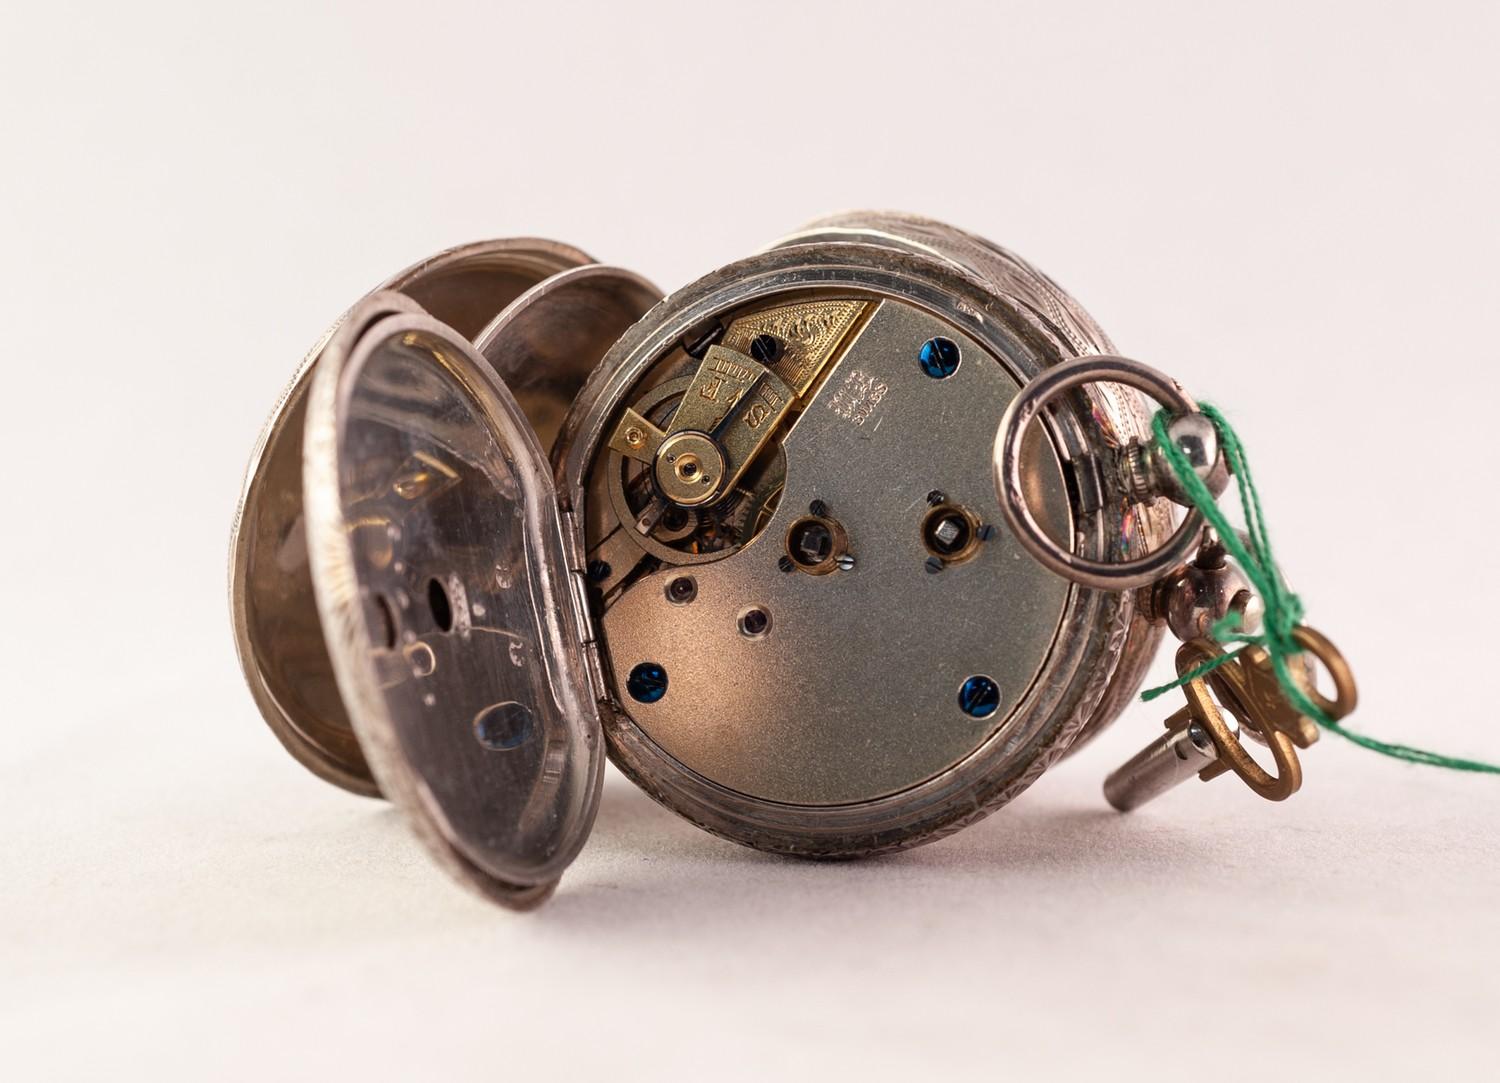 TWO LADY'S KEY WIND SWISS SILVER CASED FOB WATCHES, circa 1900, 0.935 purity, (2) - Image 3 of 3